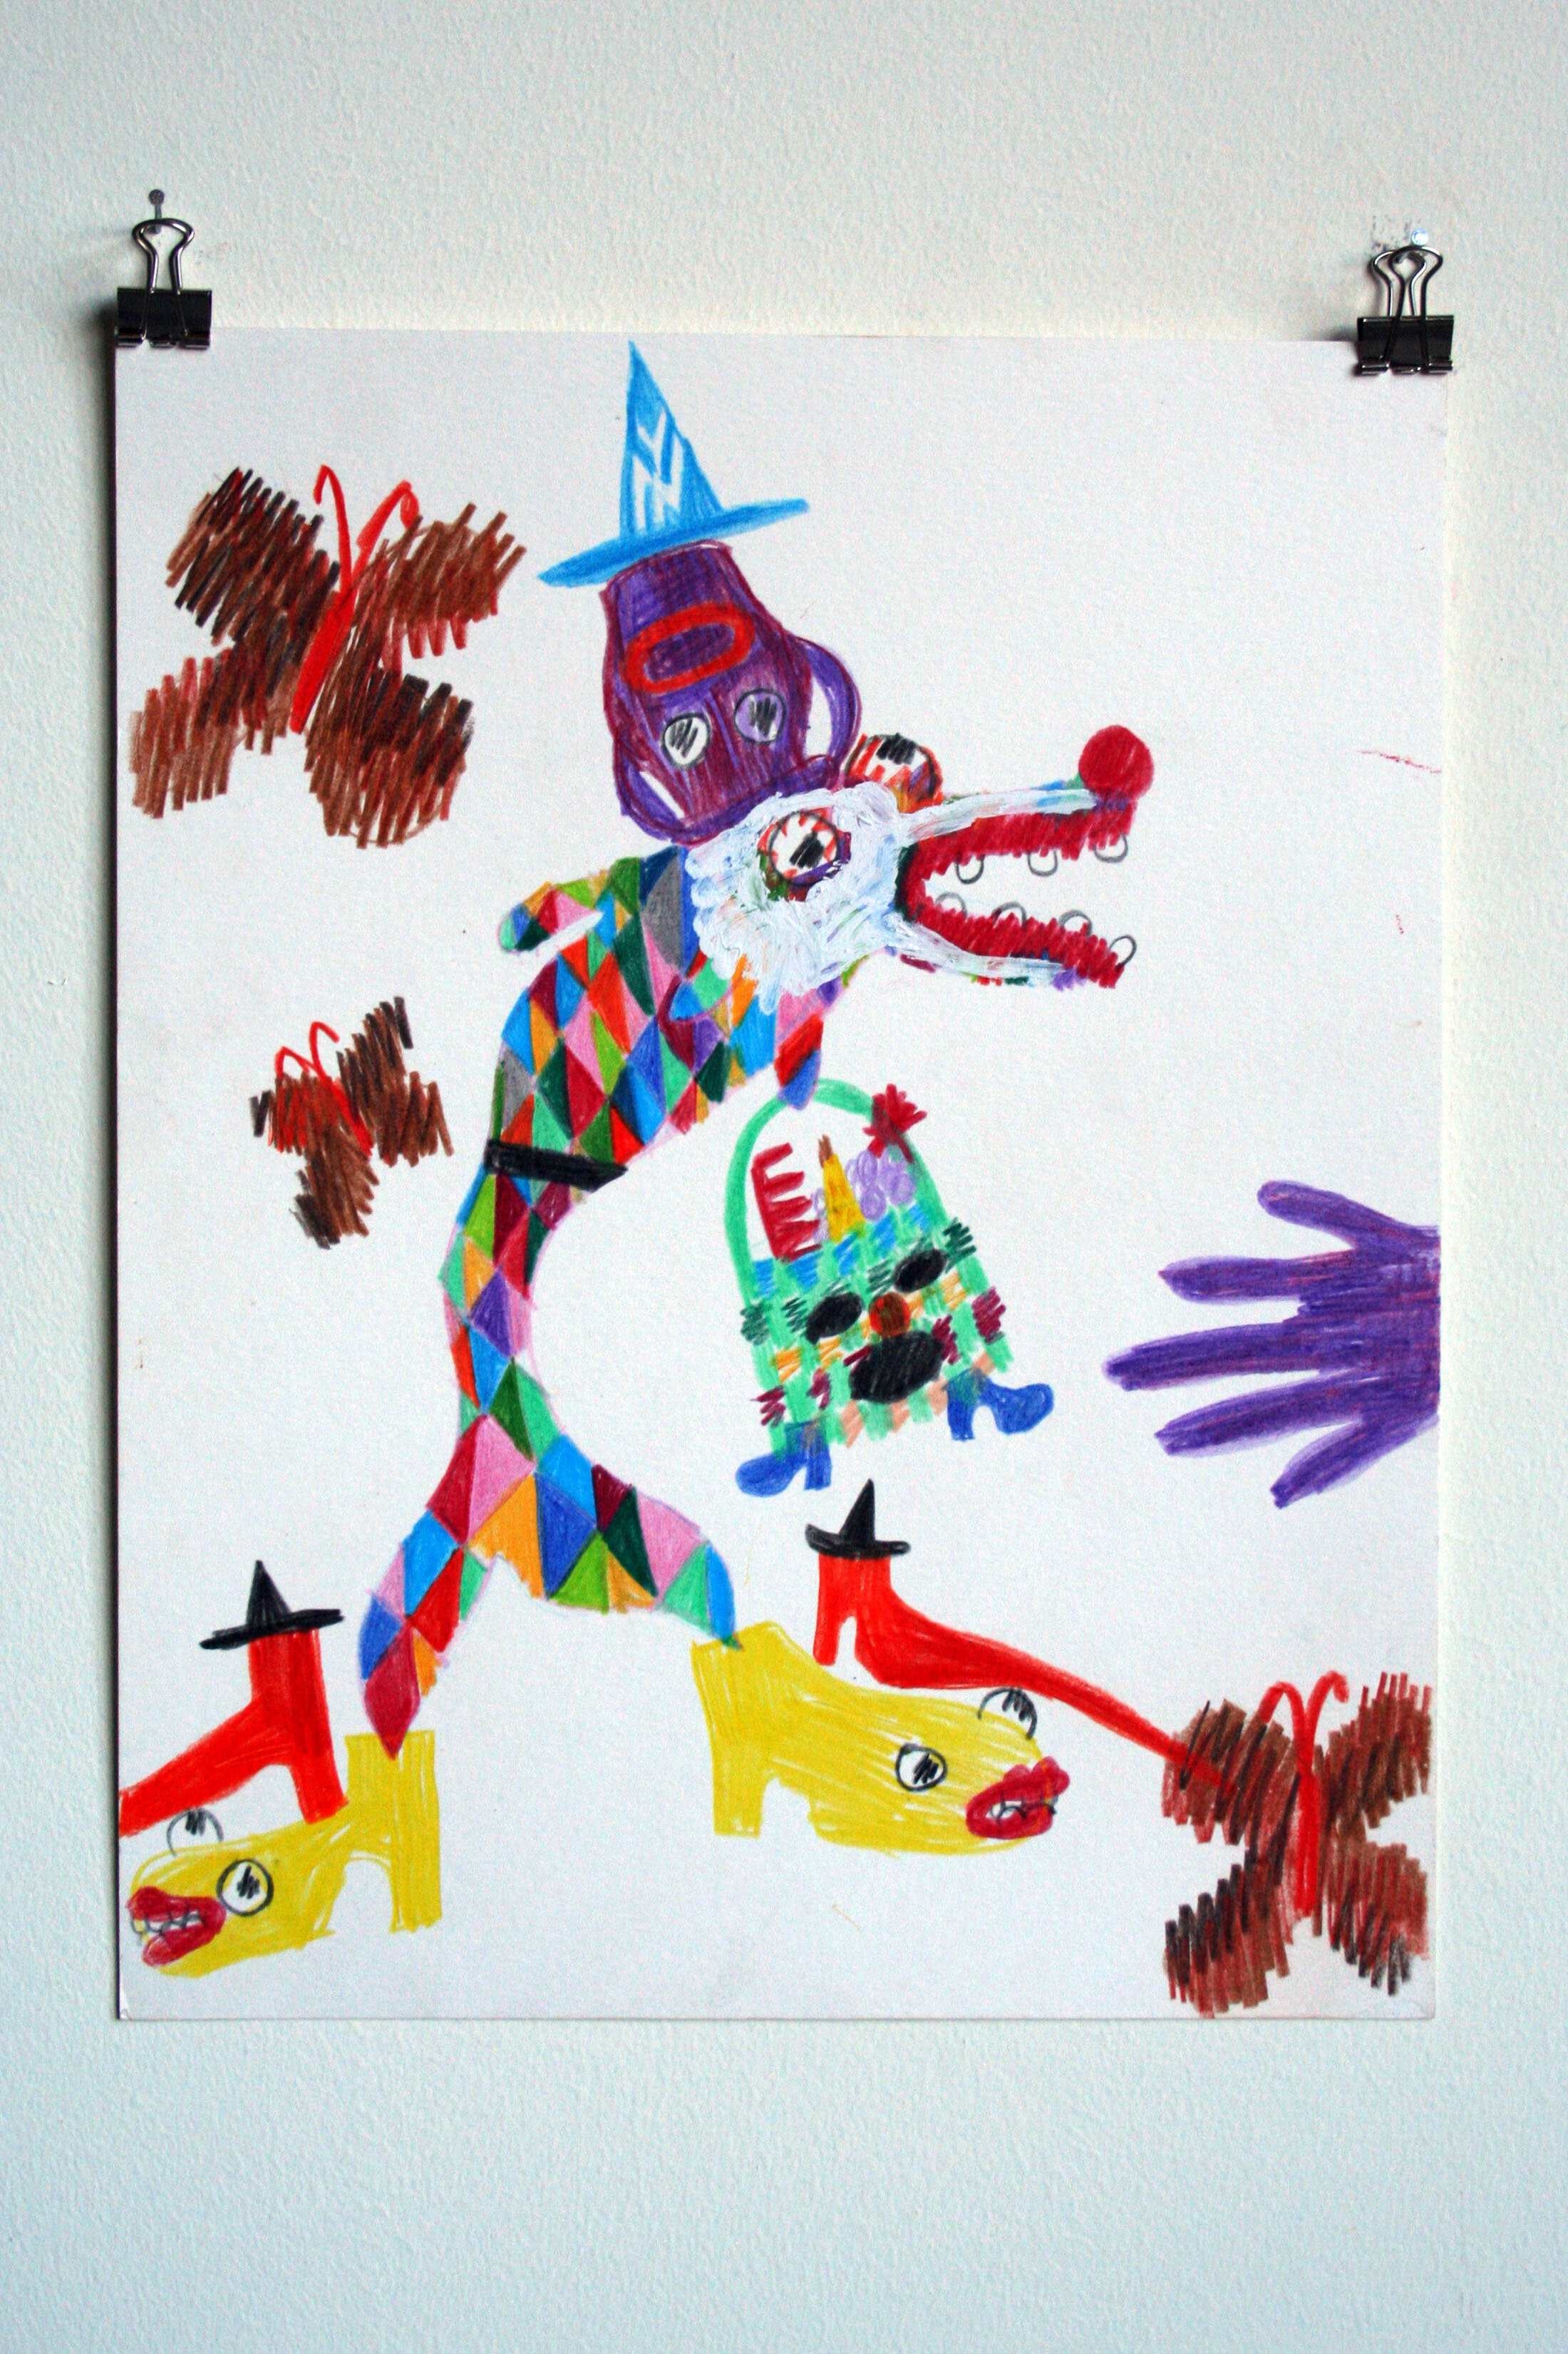   The Fool Used a Gift Basket As a Purse Wore a Vase Puppet Like a Hat,   2013  14 x 11 inches (35.56 x 27.94 cm.)  colored pencil on paper 